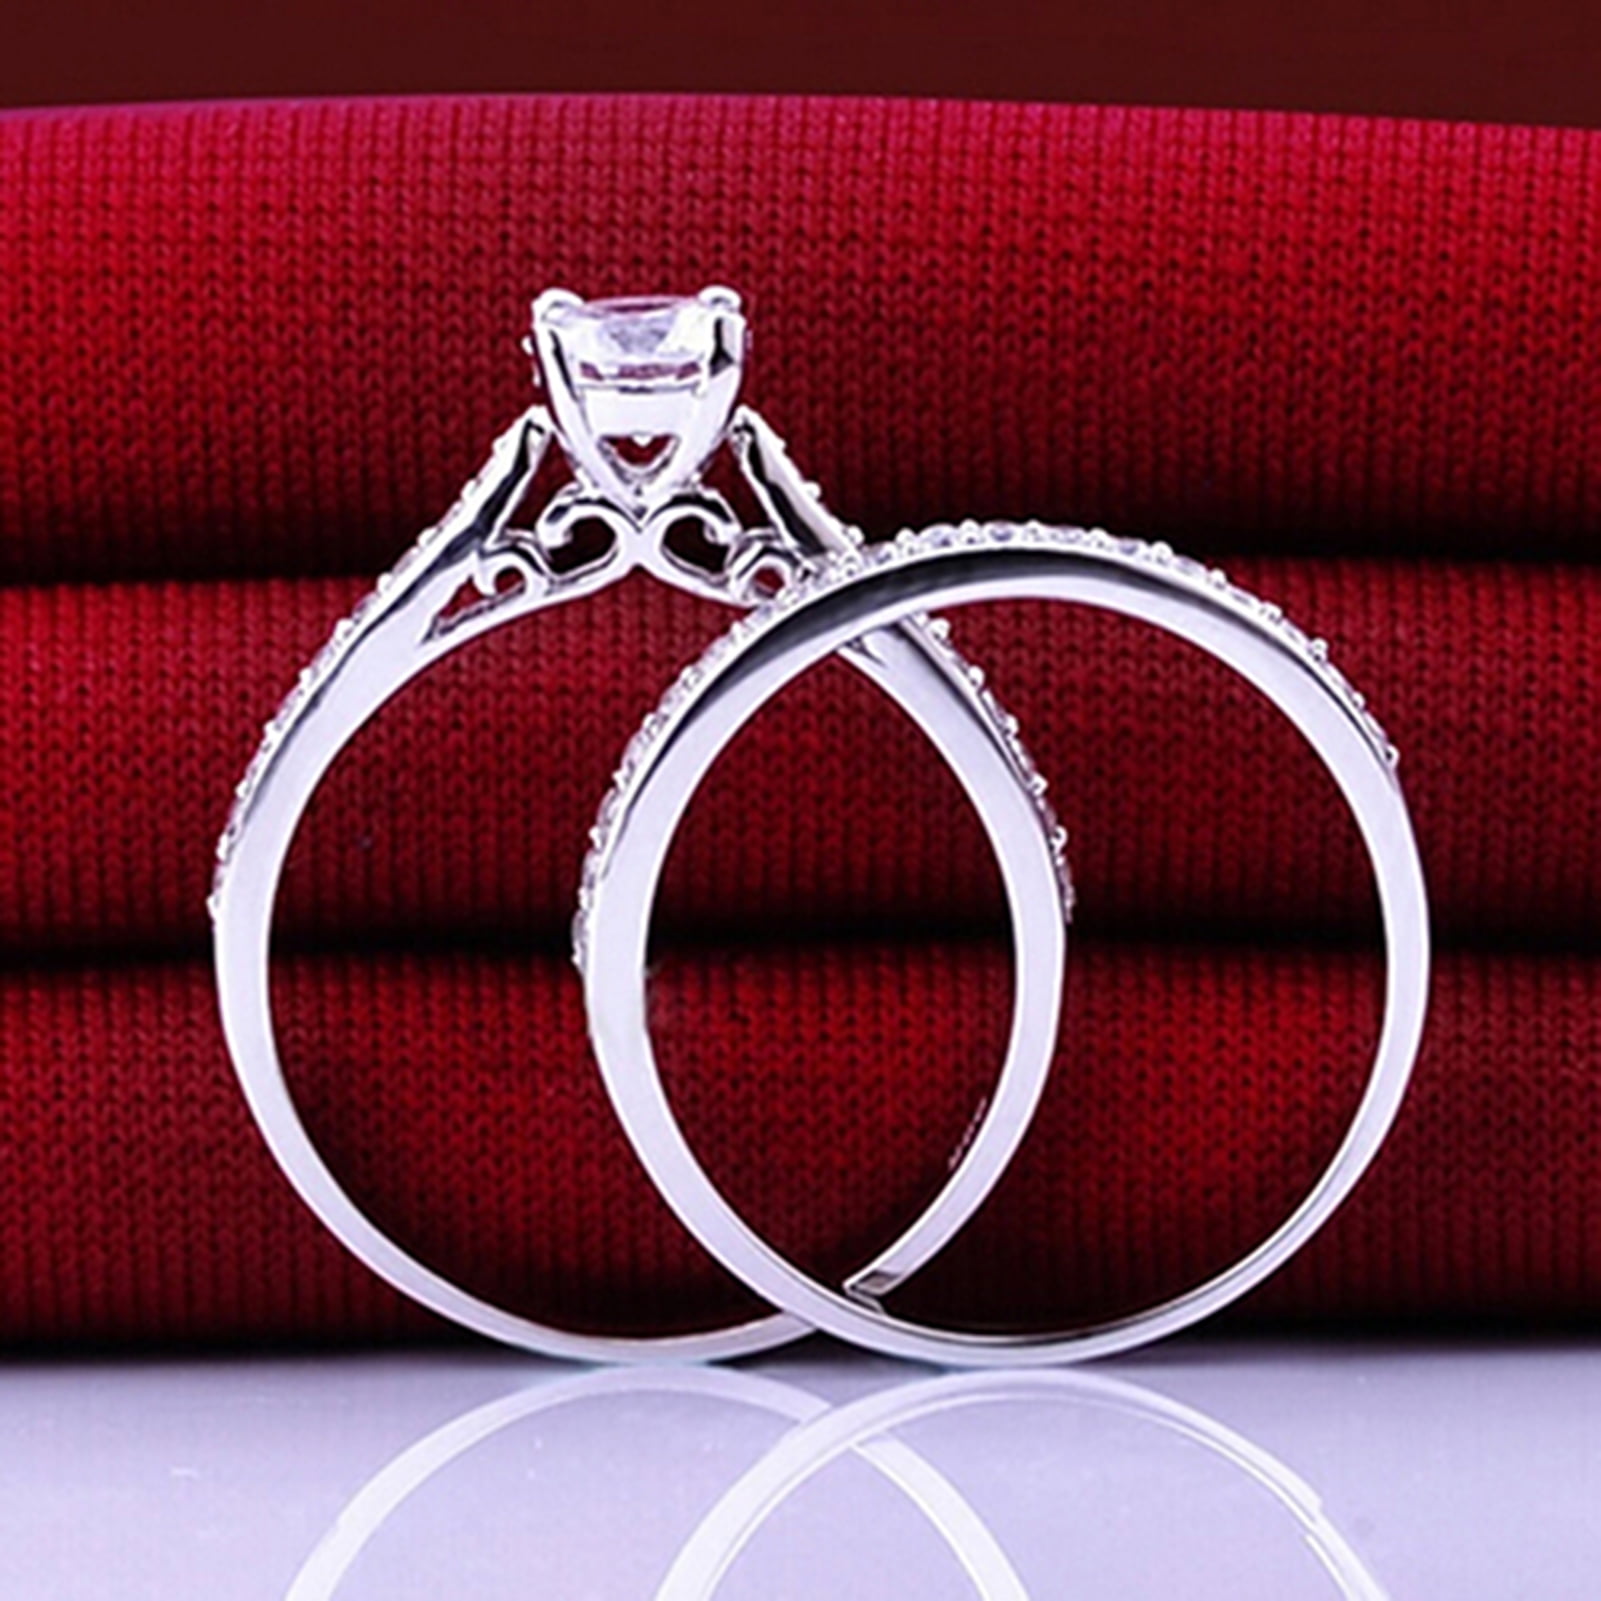 Heart And Thorn Design Frog Rings For Couples Irregular Set For Seniors And  Women Small Opening Index Finger Ring 02 From Okjewelrystore, $17.59 |  DHgate.Com